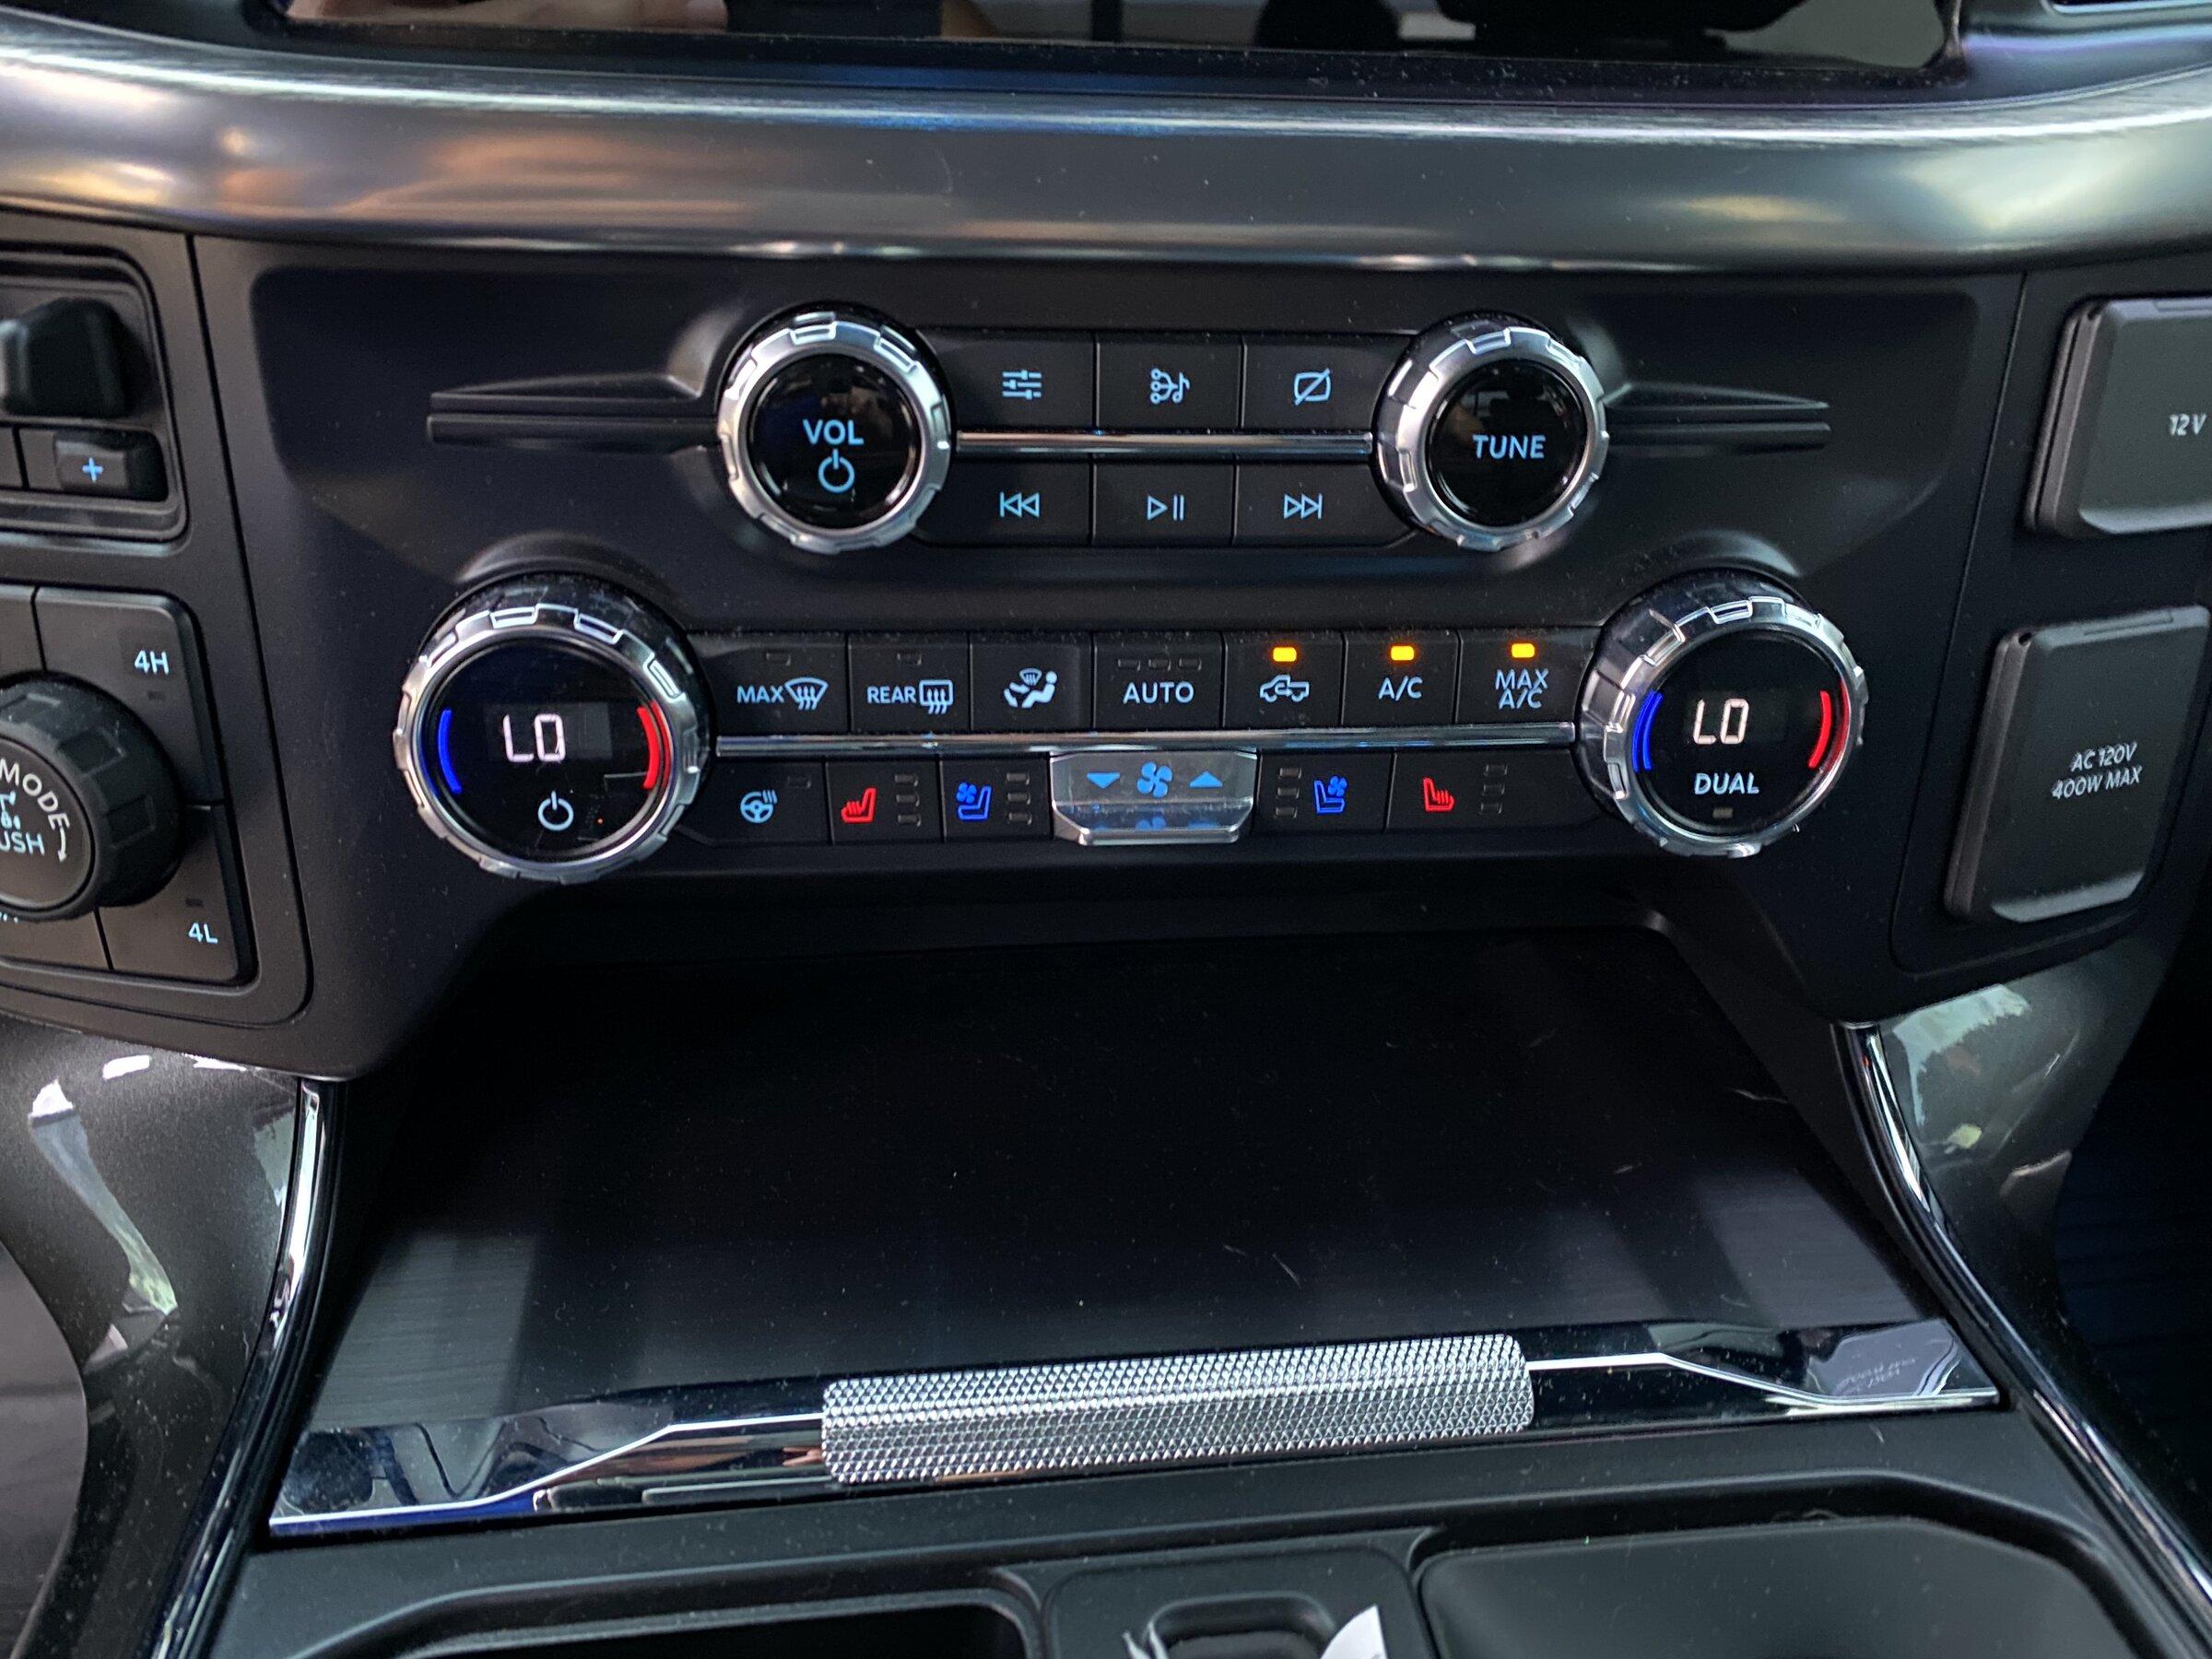 Ford F-150 Lightning 2022 MISSING FEATURES: Ambient Lighting & Differences In DEATC between 2021 and 2022 F-150s? DB7FBEA5-99AD-4510-93BE-E4126568C3DA